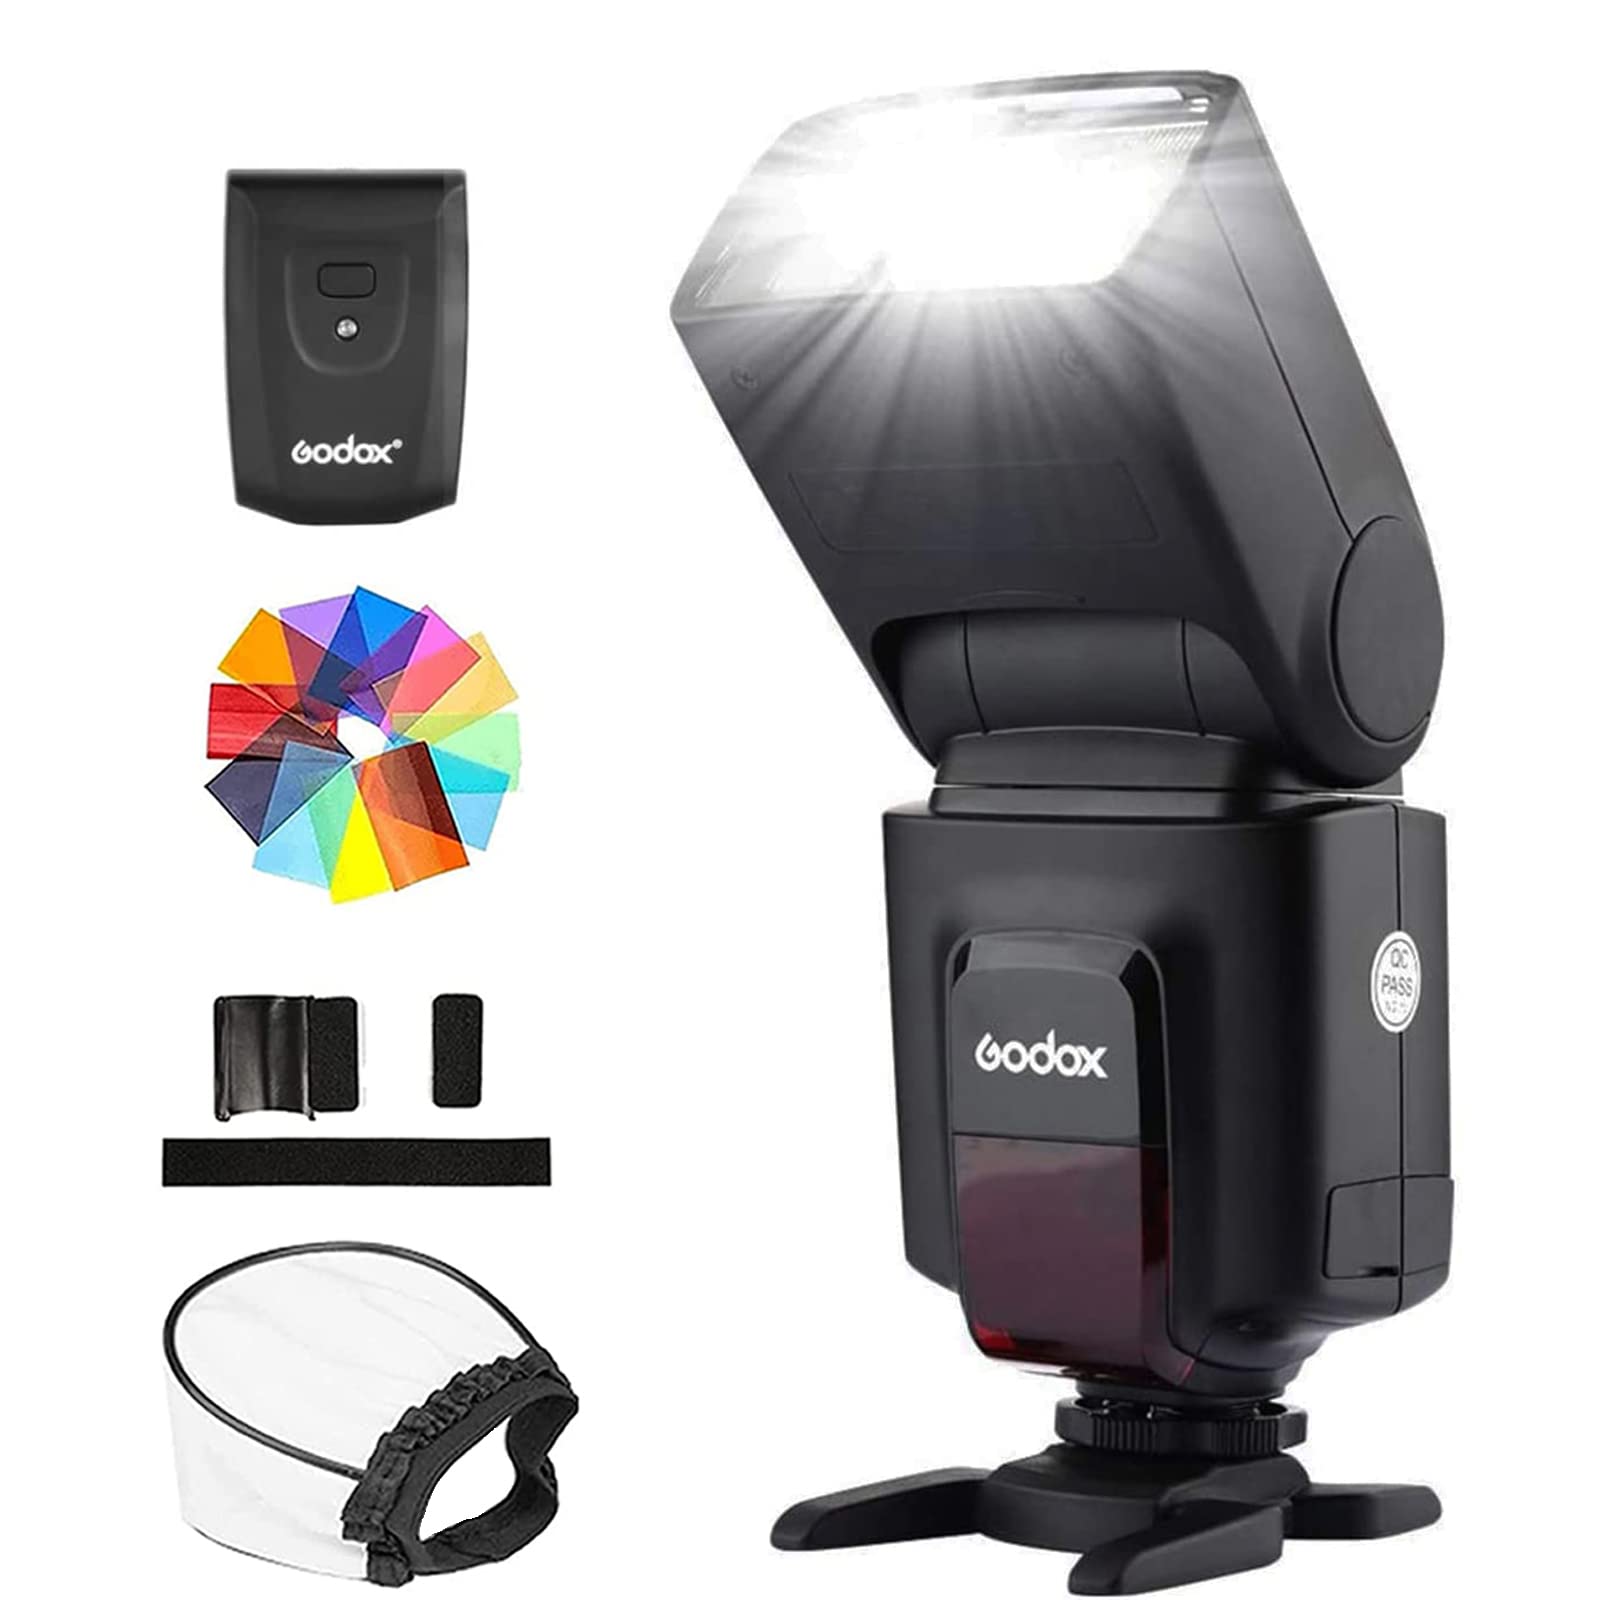 Godox TT520II Wireless Transmission Flash Speedlite - Built-in Receiver and RT Transmitter Compatible for Canon Nikon Panasonic Olympus Pentax and Other DSLR Cameras with Standard Hot Shoe